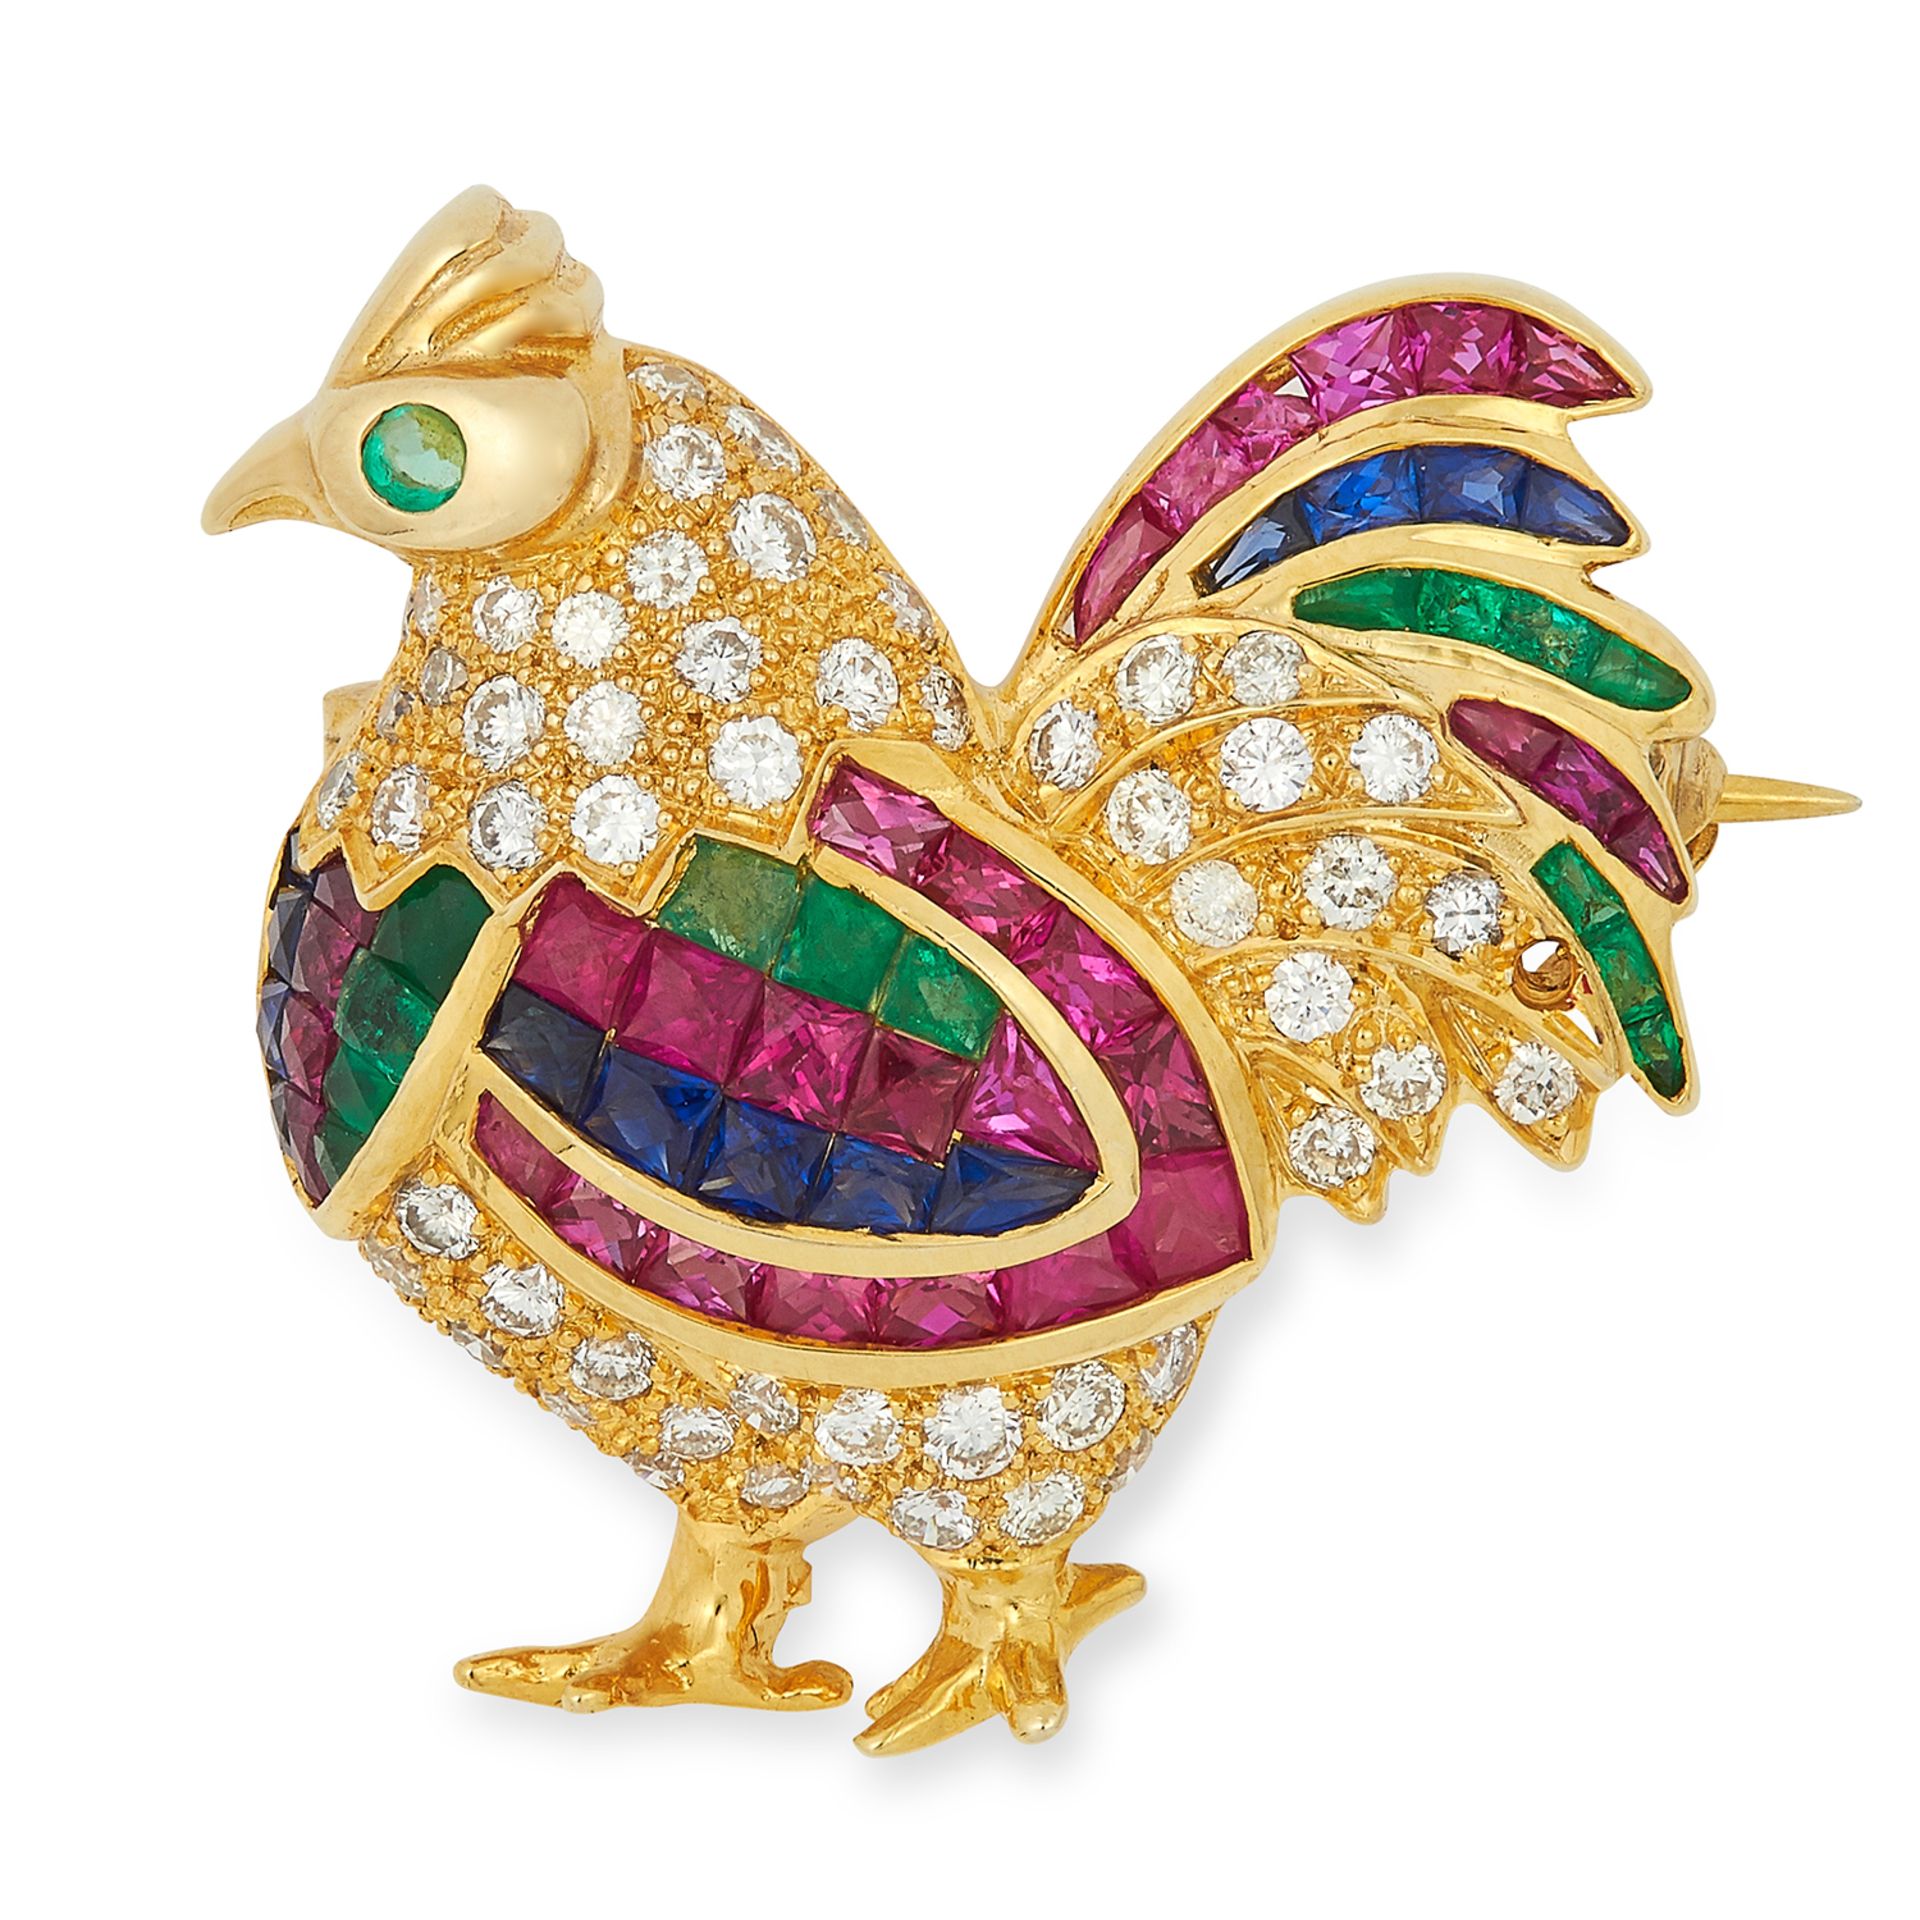 GEMSET COCKERAL BROOCH set with step cut rubies, sapphires and emeralds and round cut diamonds and